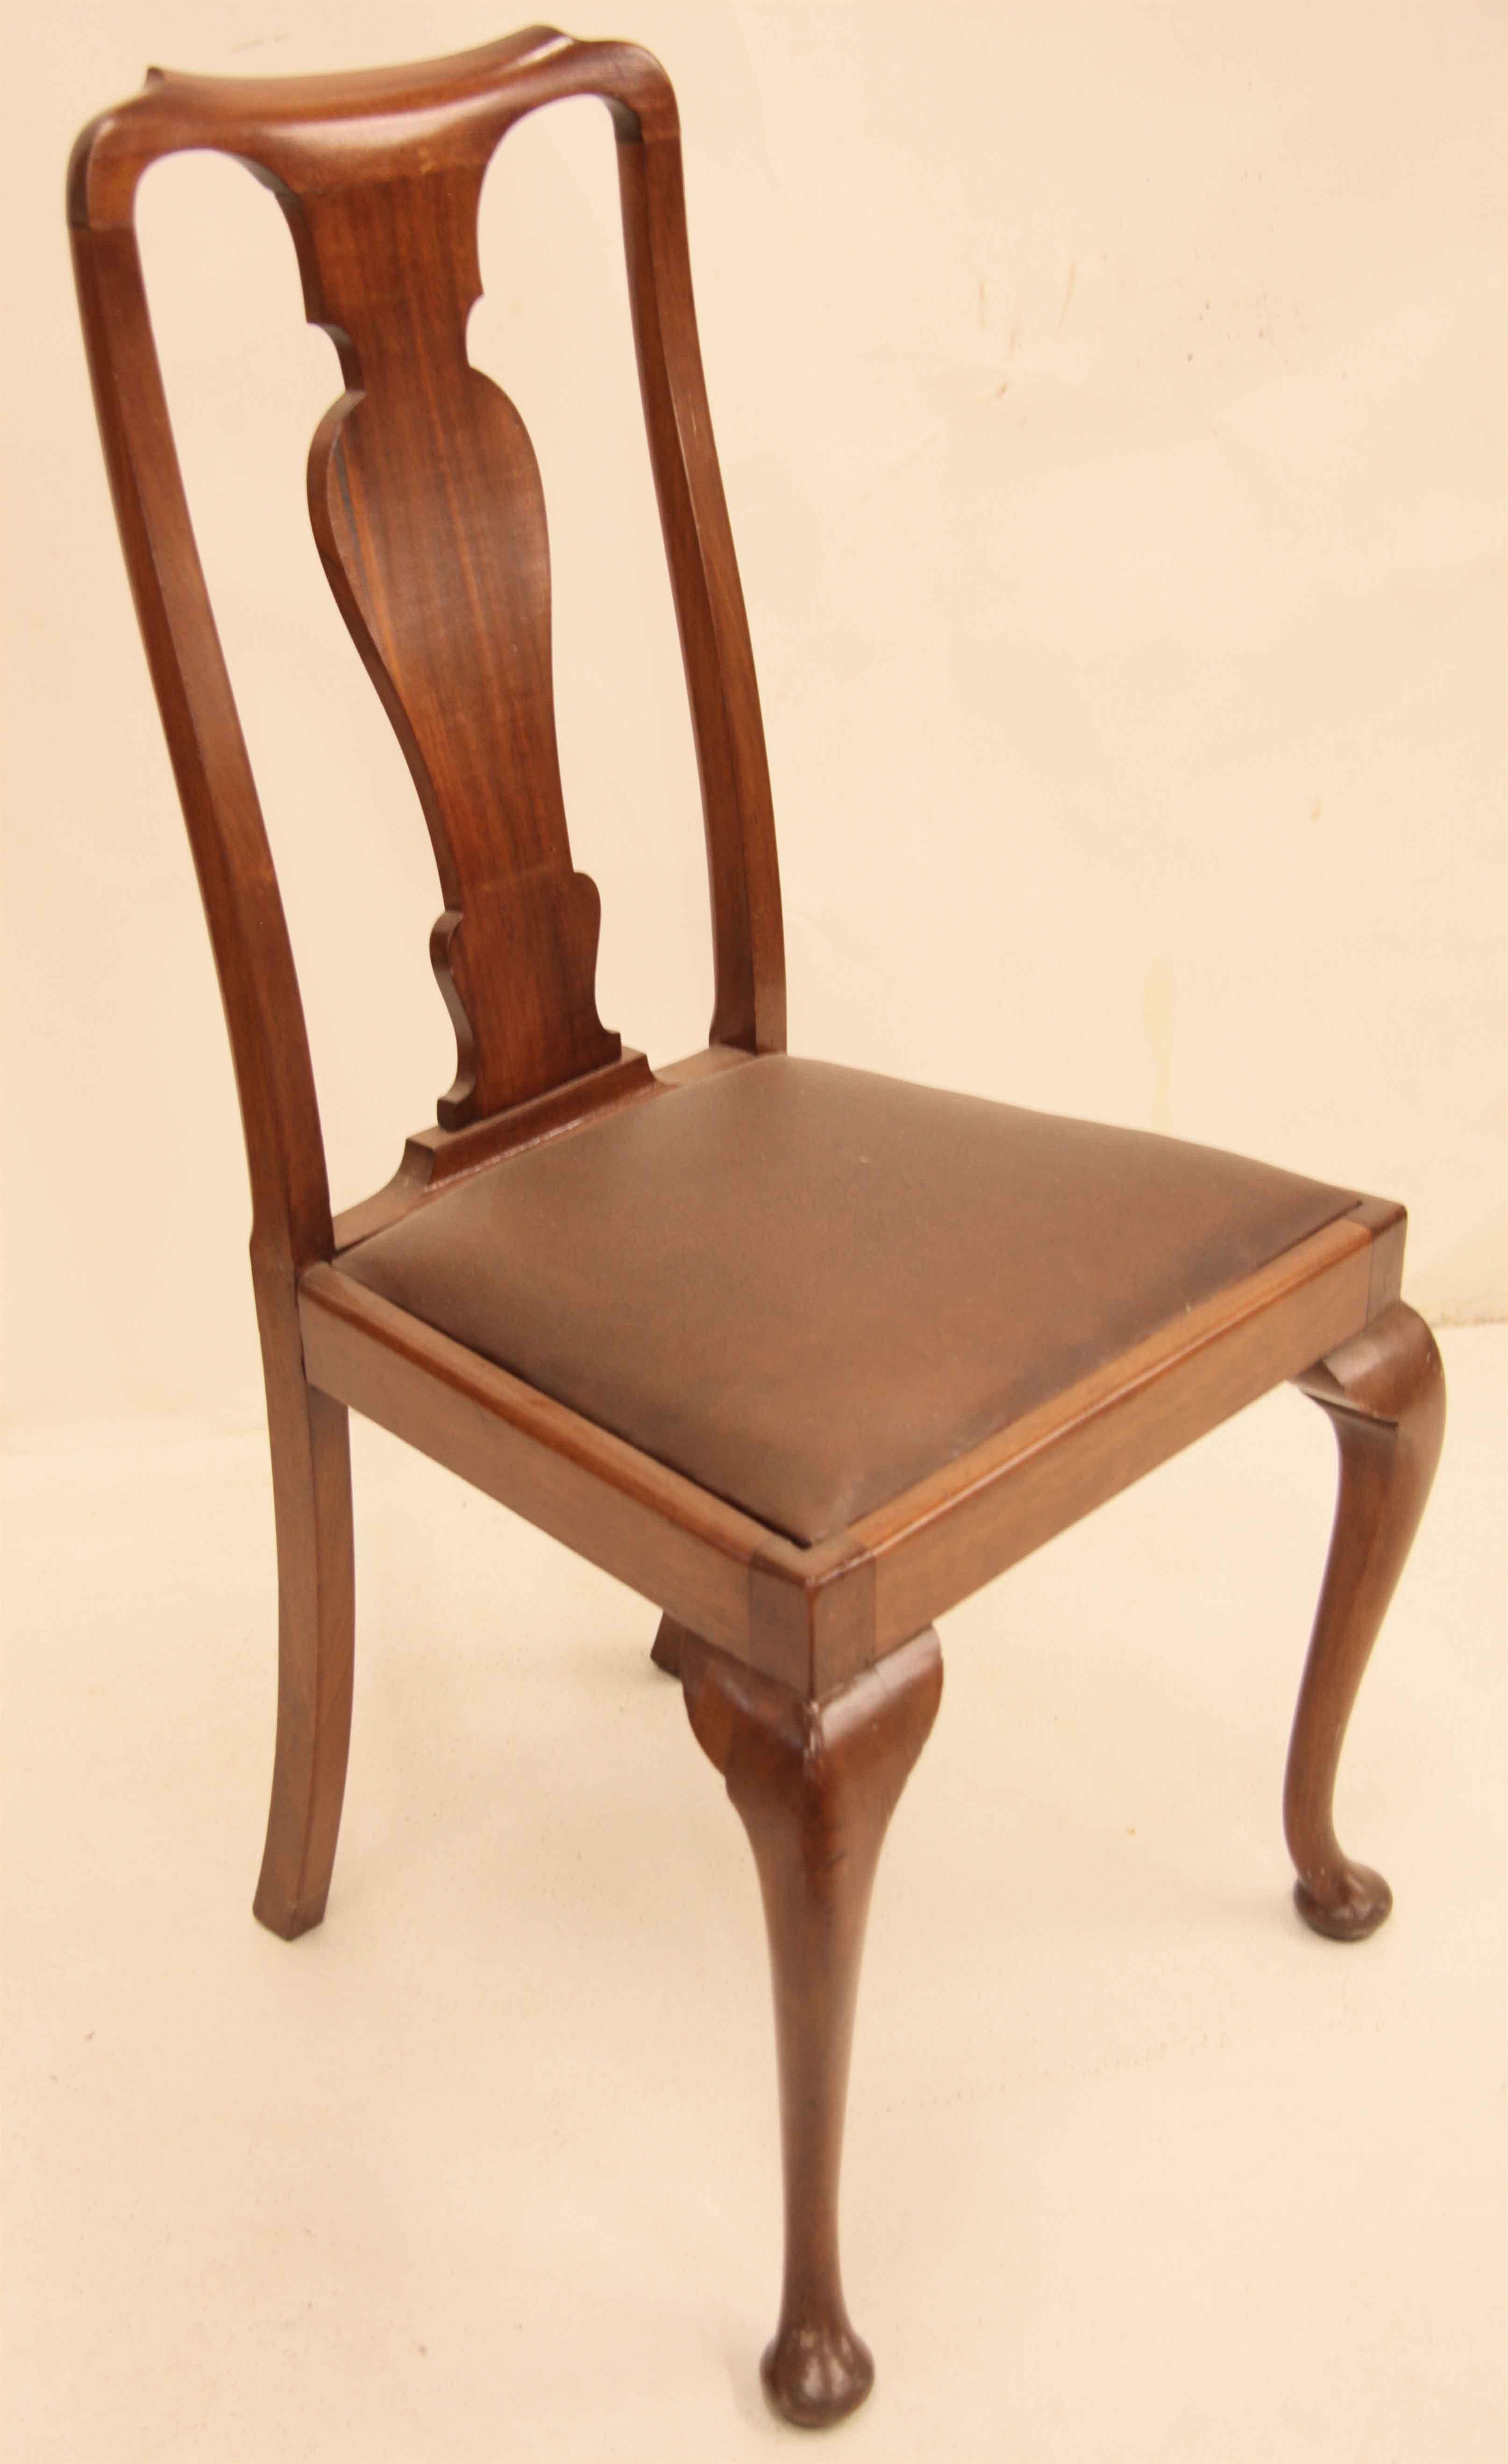 Set of four mahogany Queen Anne style chairs with a pleasant warm color and patina, typical vase shaped center splat, upholstered slip seats for easy recovering,  cabriole legs with well developed knee and pad feet.